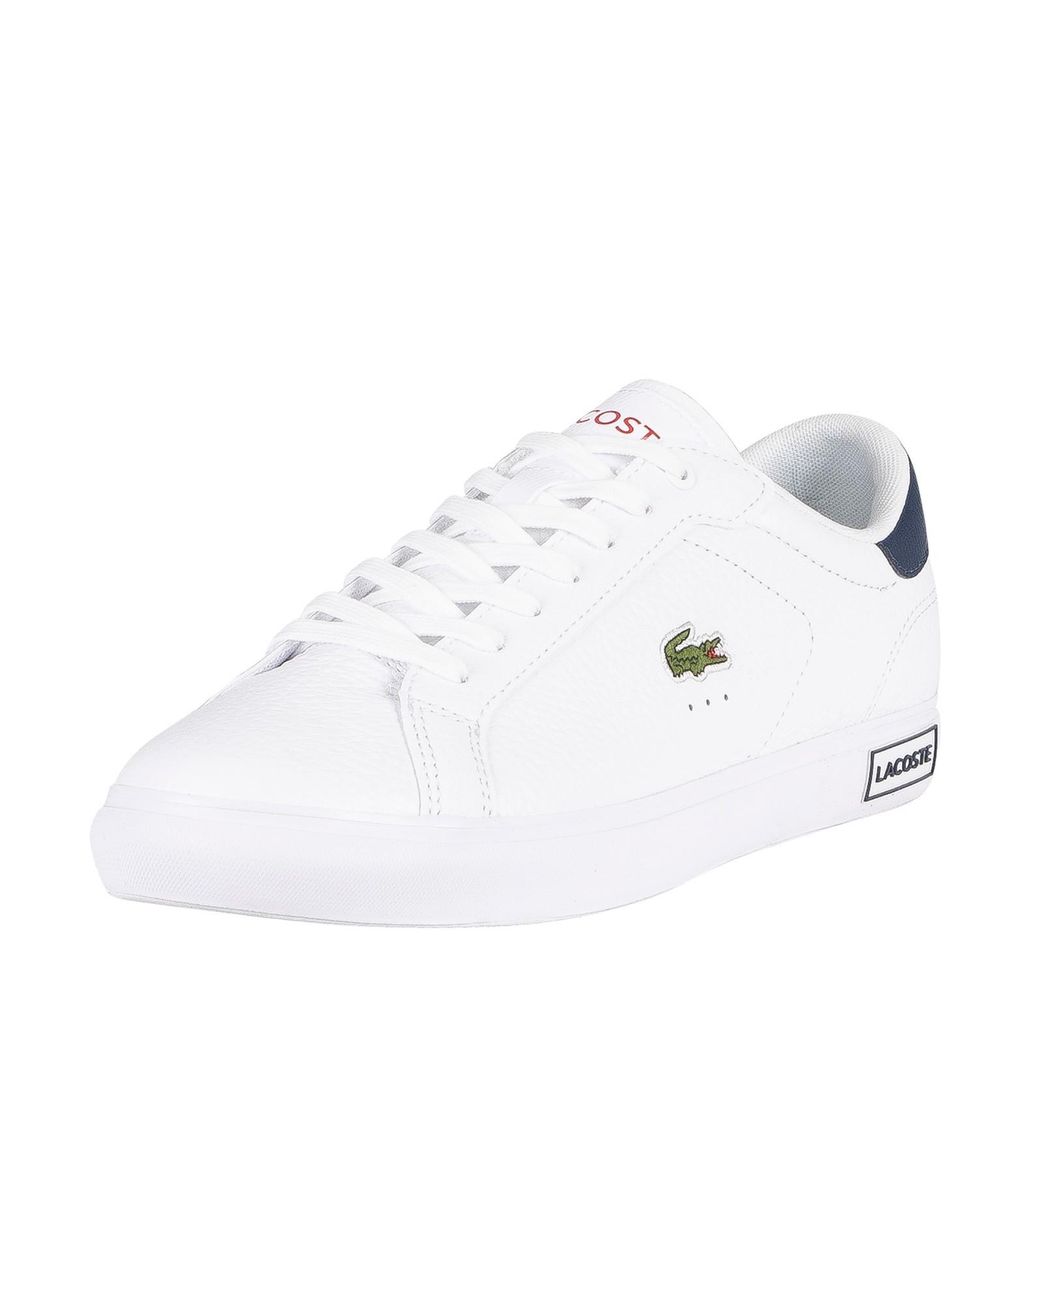 Lacoste Powercourt 0721 2 Sma Leather Trainers in White for Men | Lyst  Canada